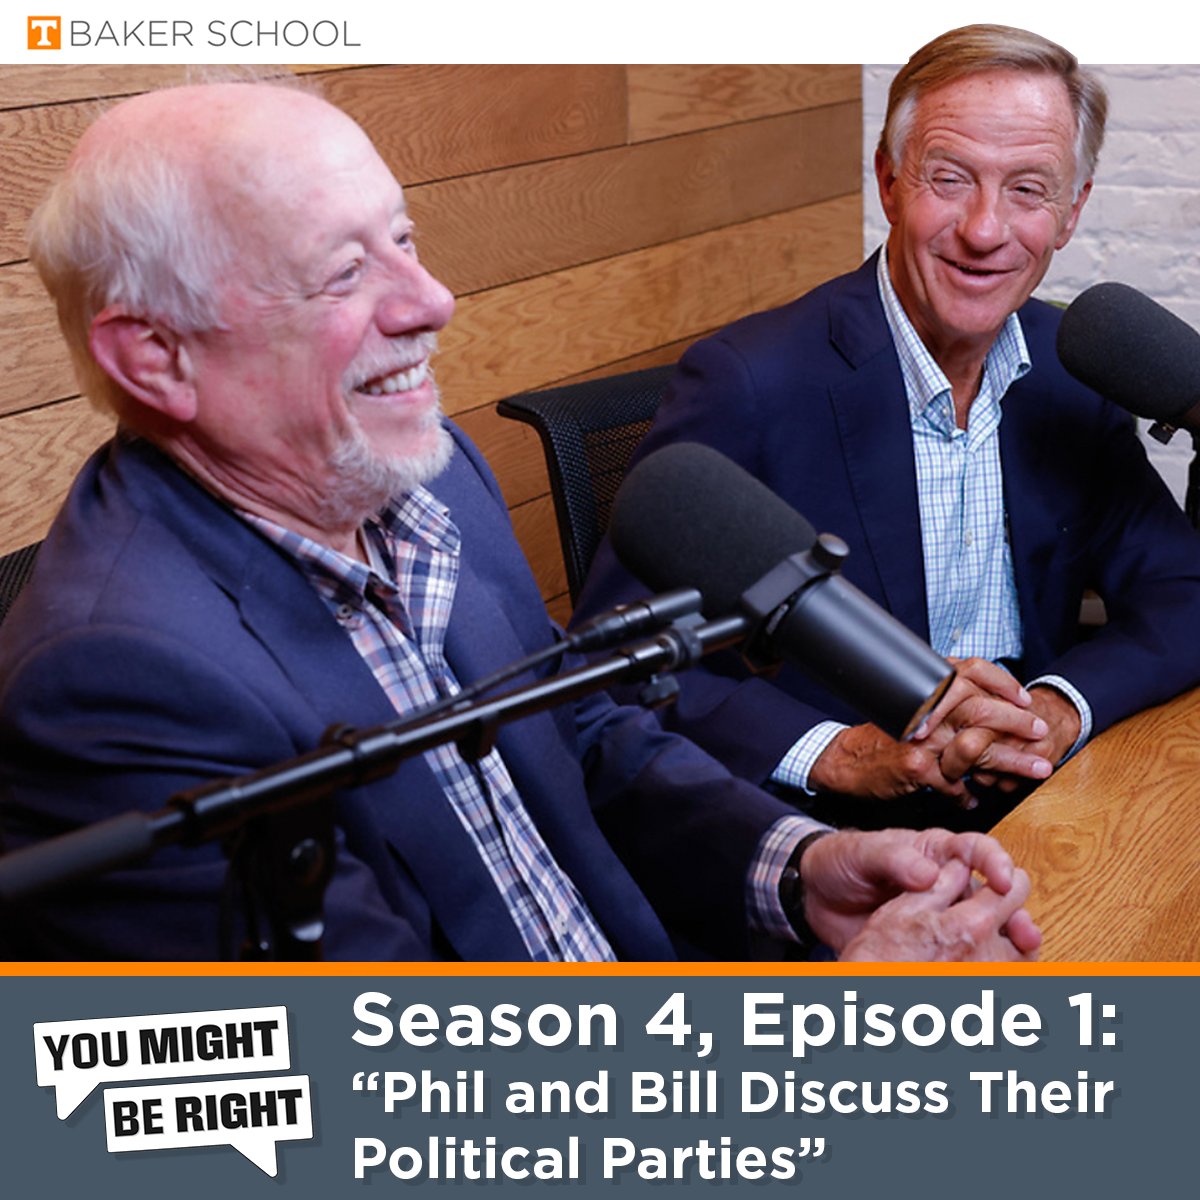 #ICYMI: On Season 4, Episode 1, Gov. @BillHaslam, a Republican, and Gov. @PhilBredesen, a Democrat, sat down to discuss why they chose to be a part of their respective political parties, how they're currently squaring their personal values with the USA's ever-evolving political…